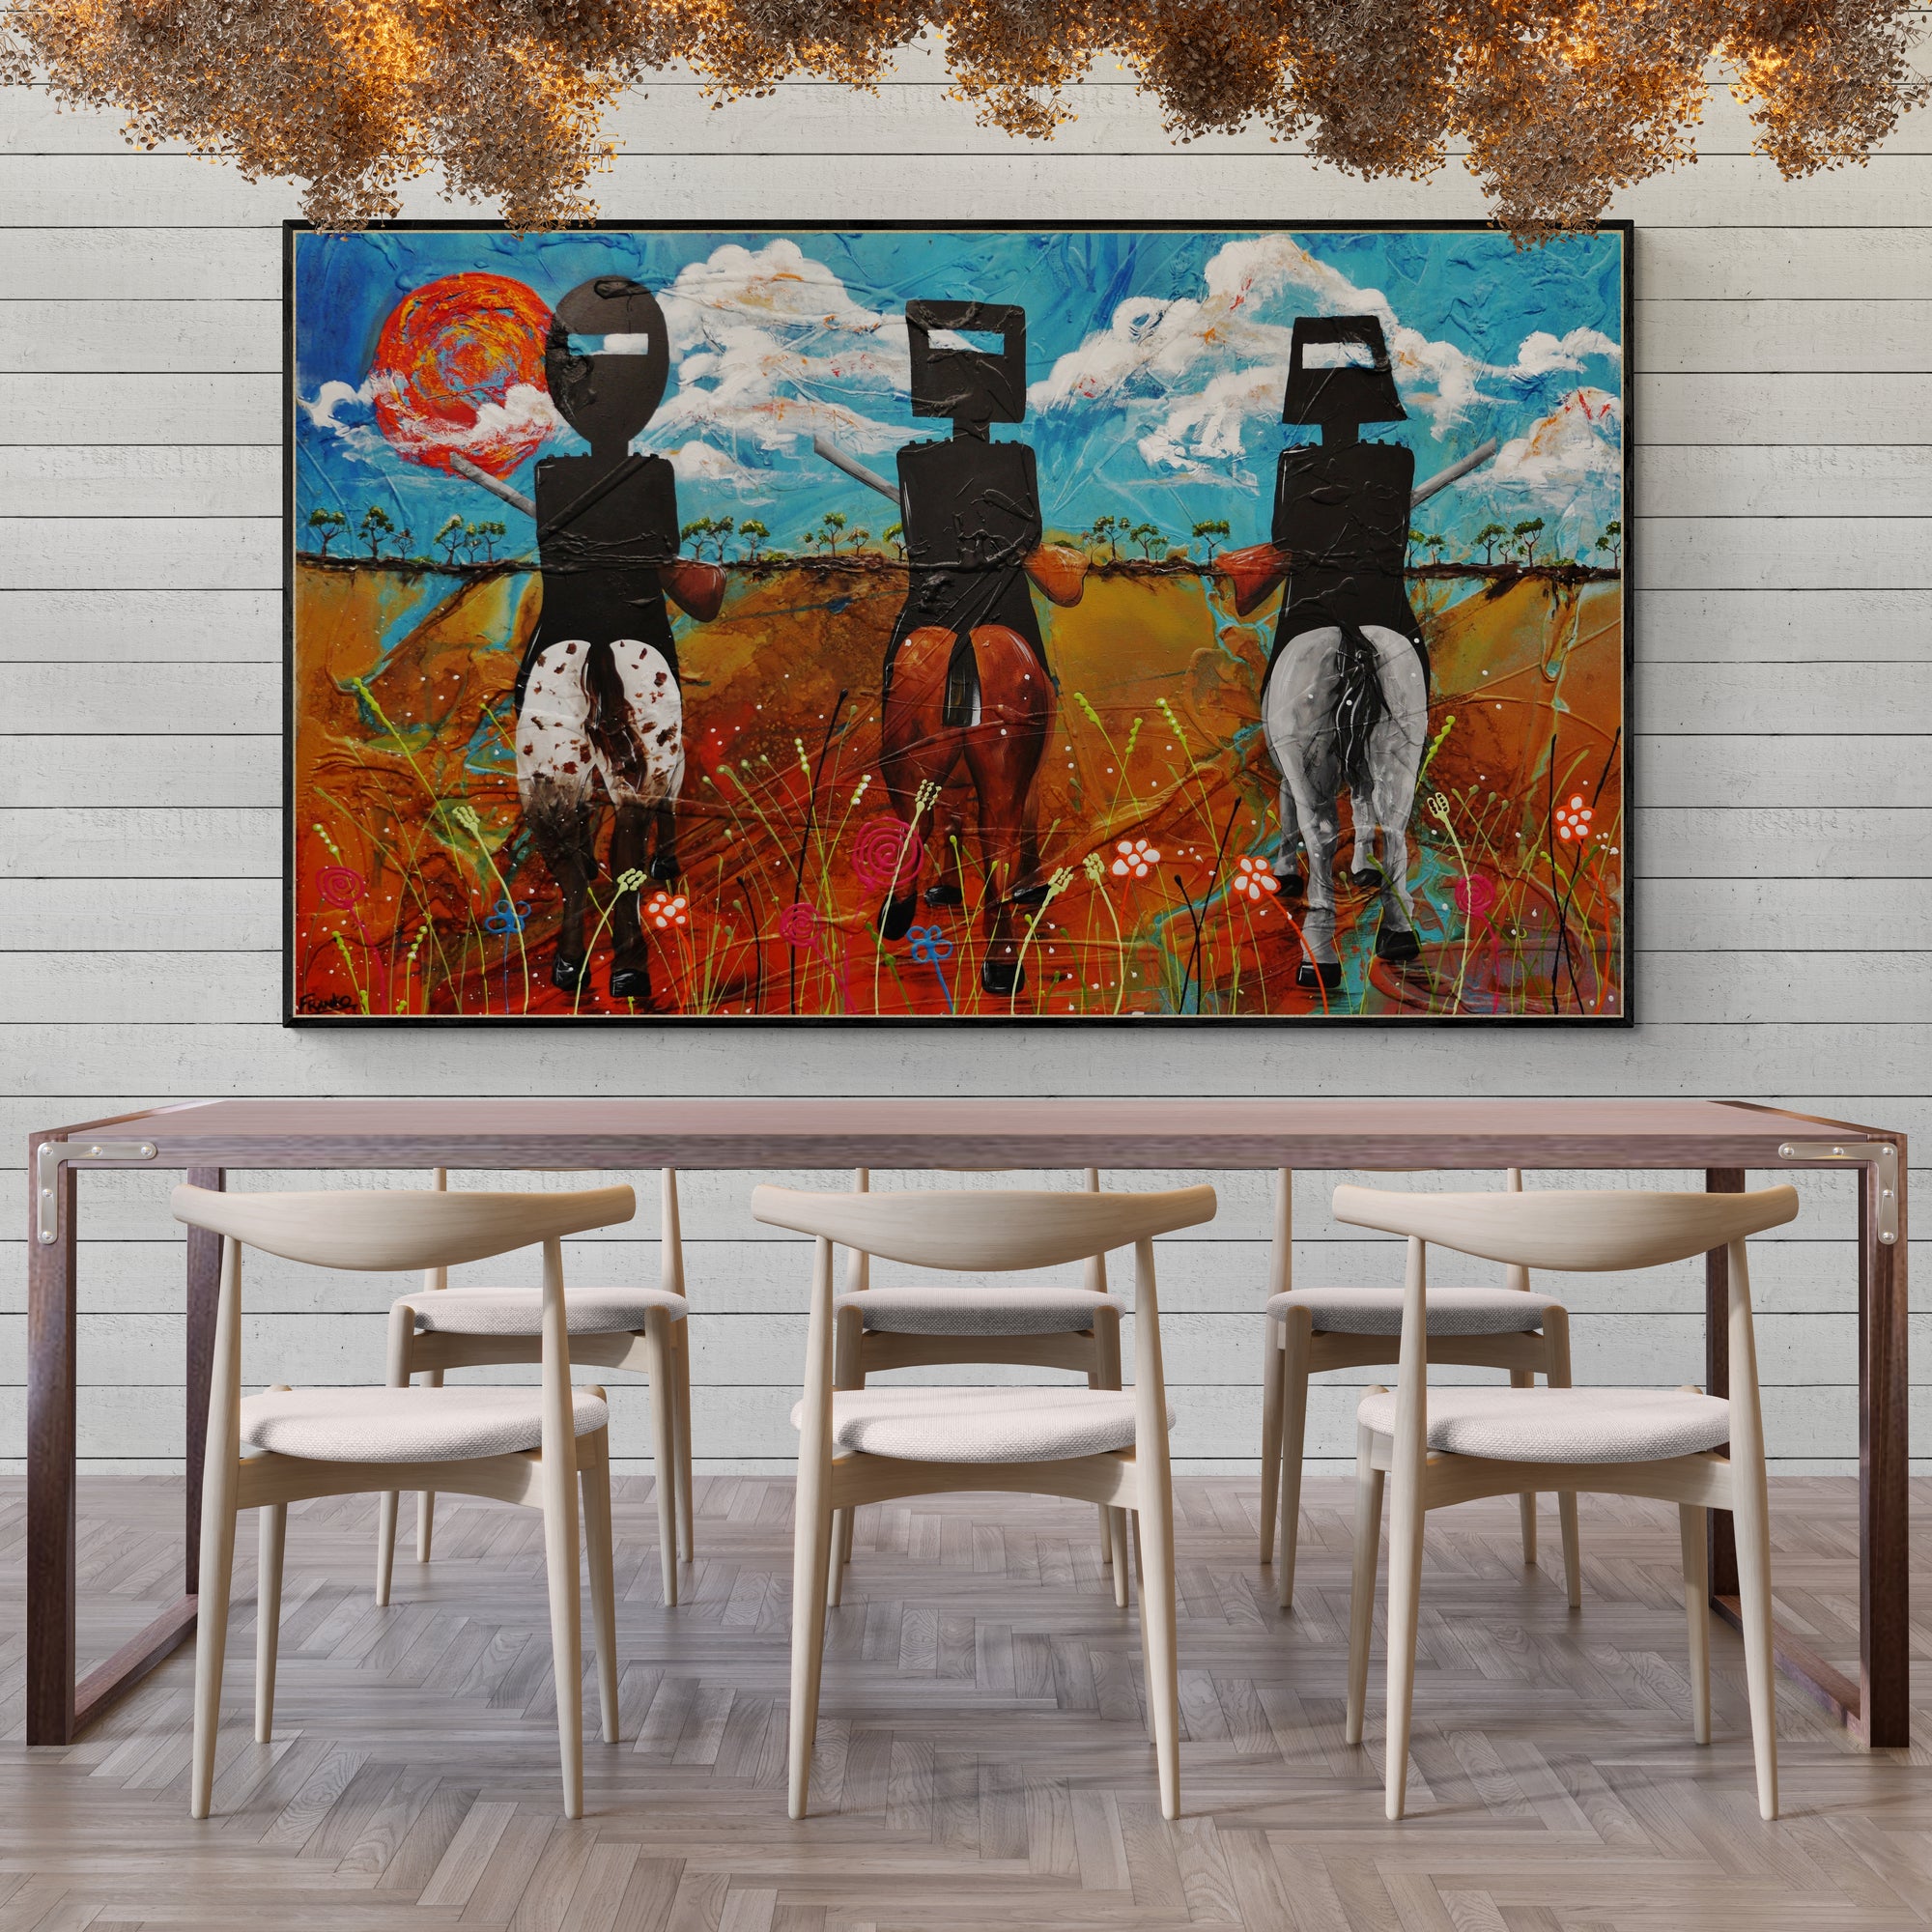 Kelly Three 200cm x 120cm Ned Kelly Abstract Realism Textured Painting